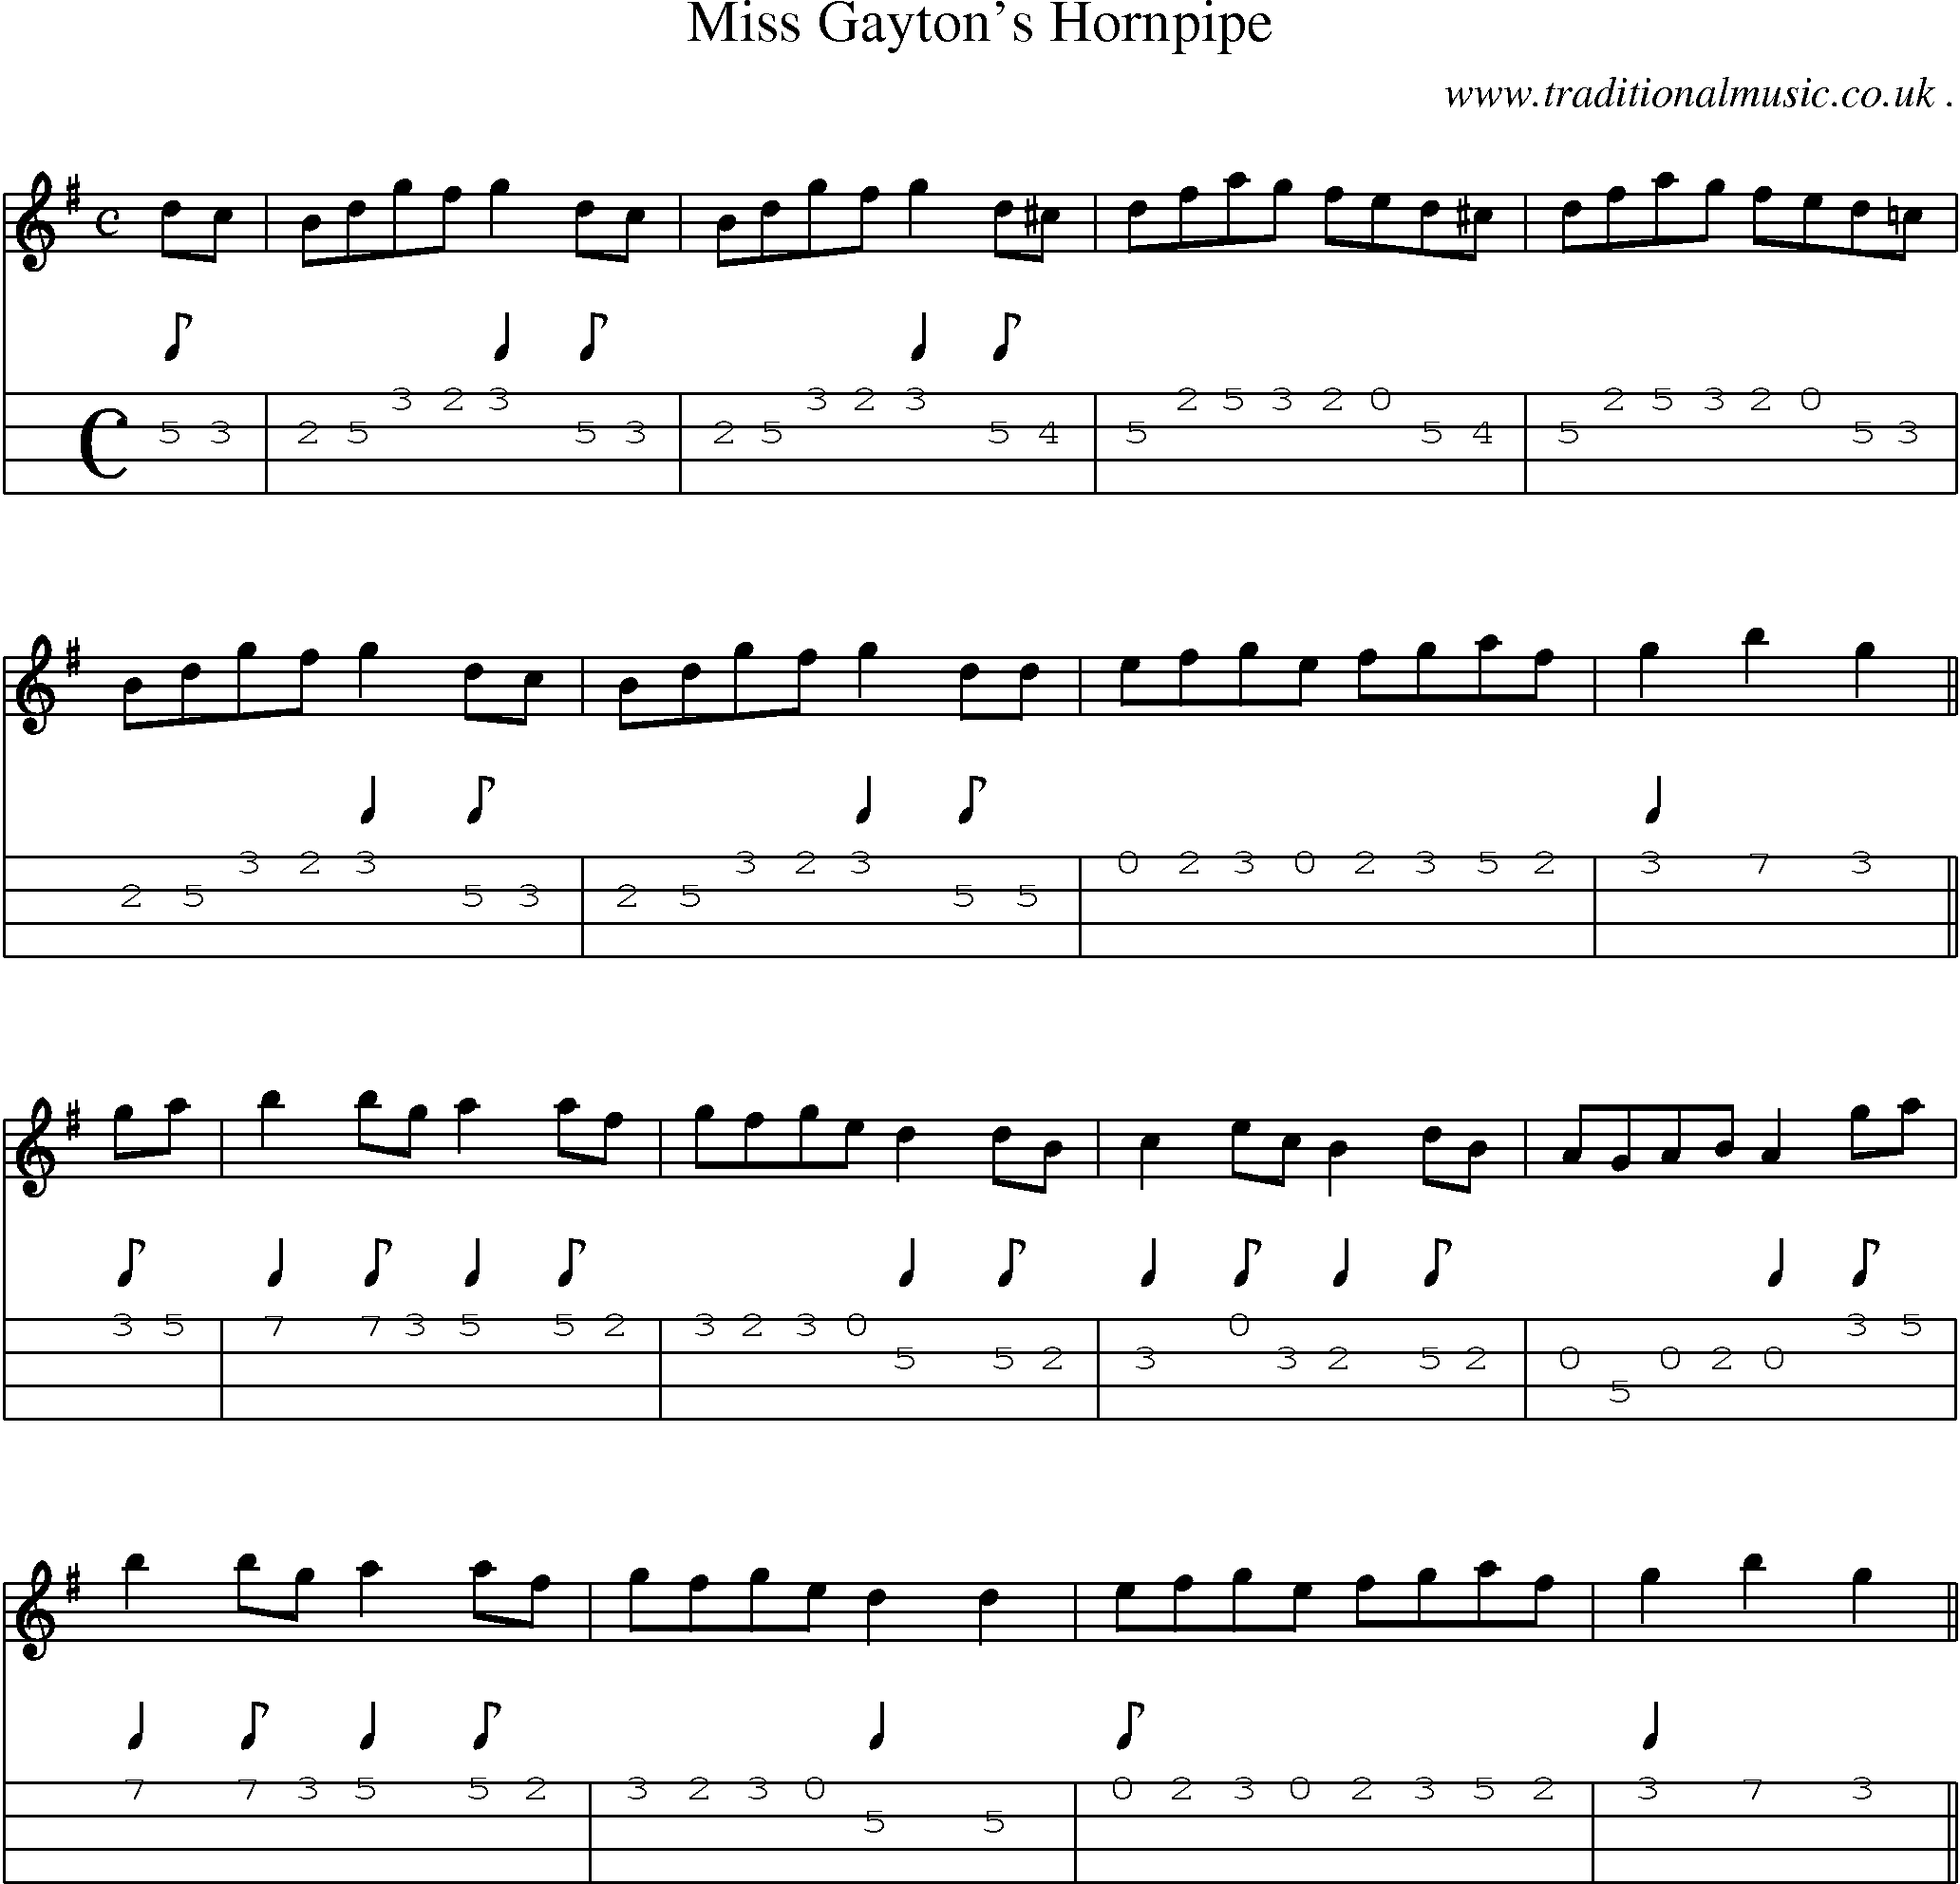 Sheet-music  score, Chords and Mandolin Tabs for Miss Gaytons Hornpipe